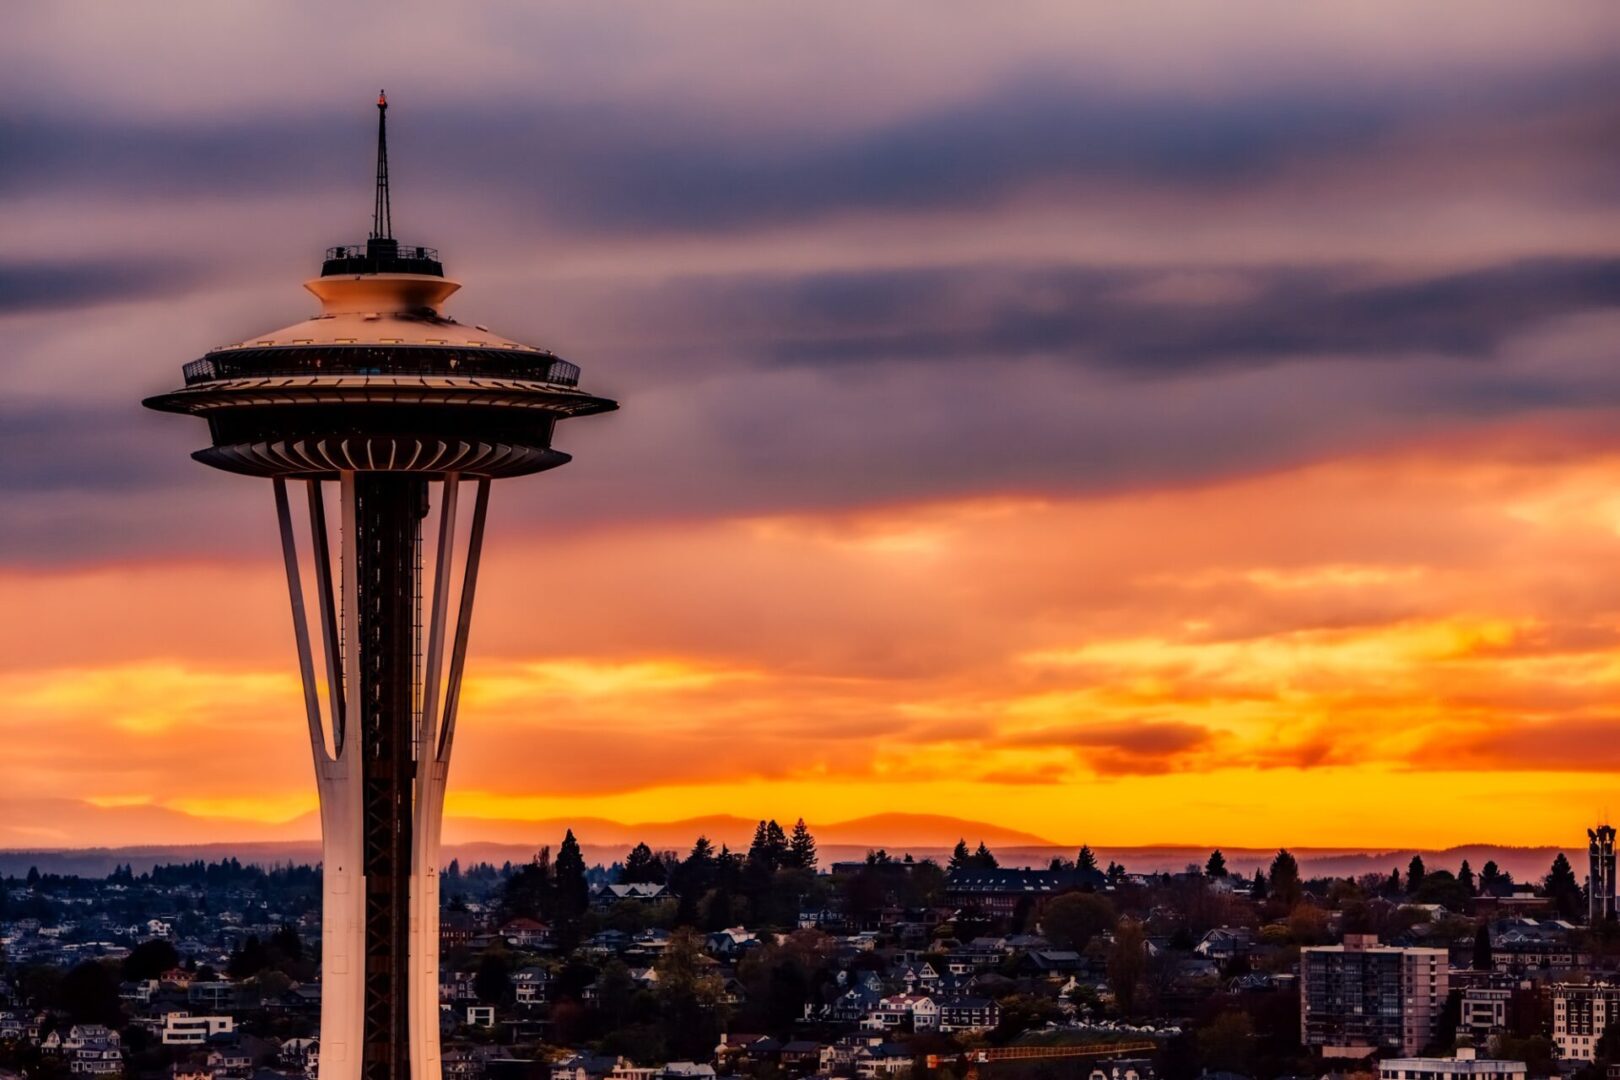 A view of the space needle at sunset.